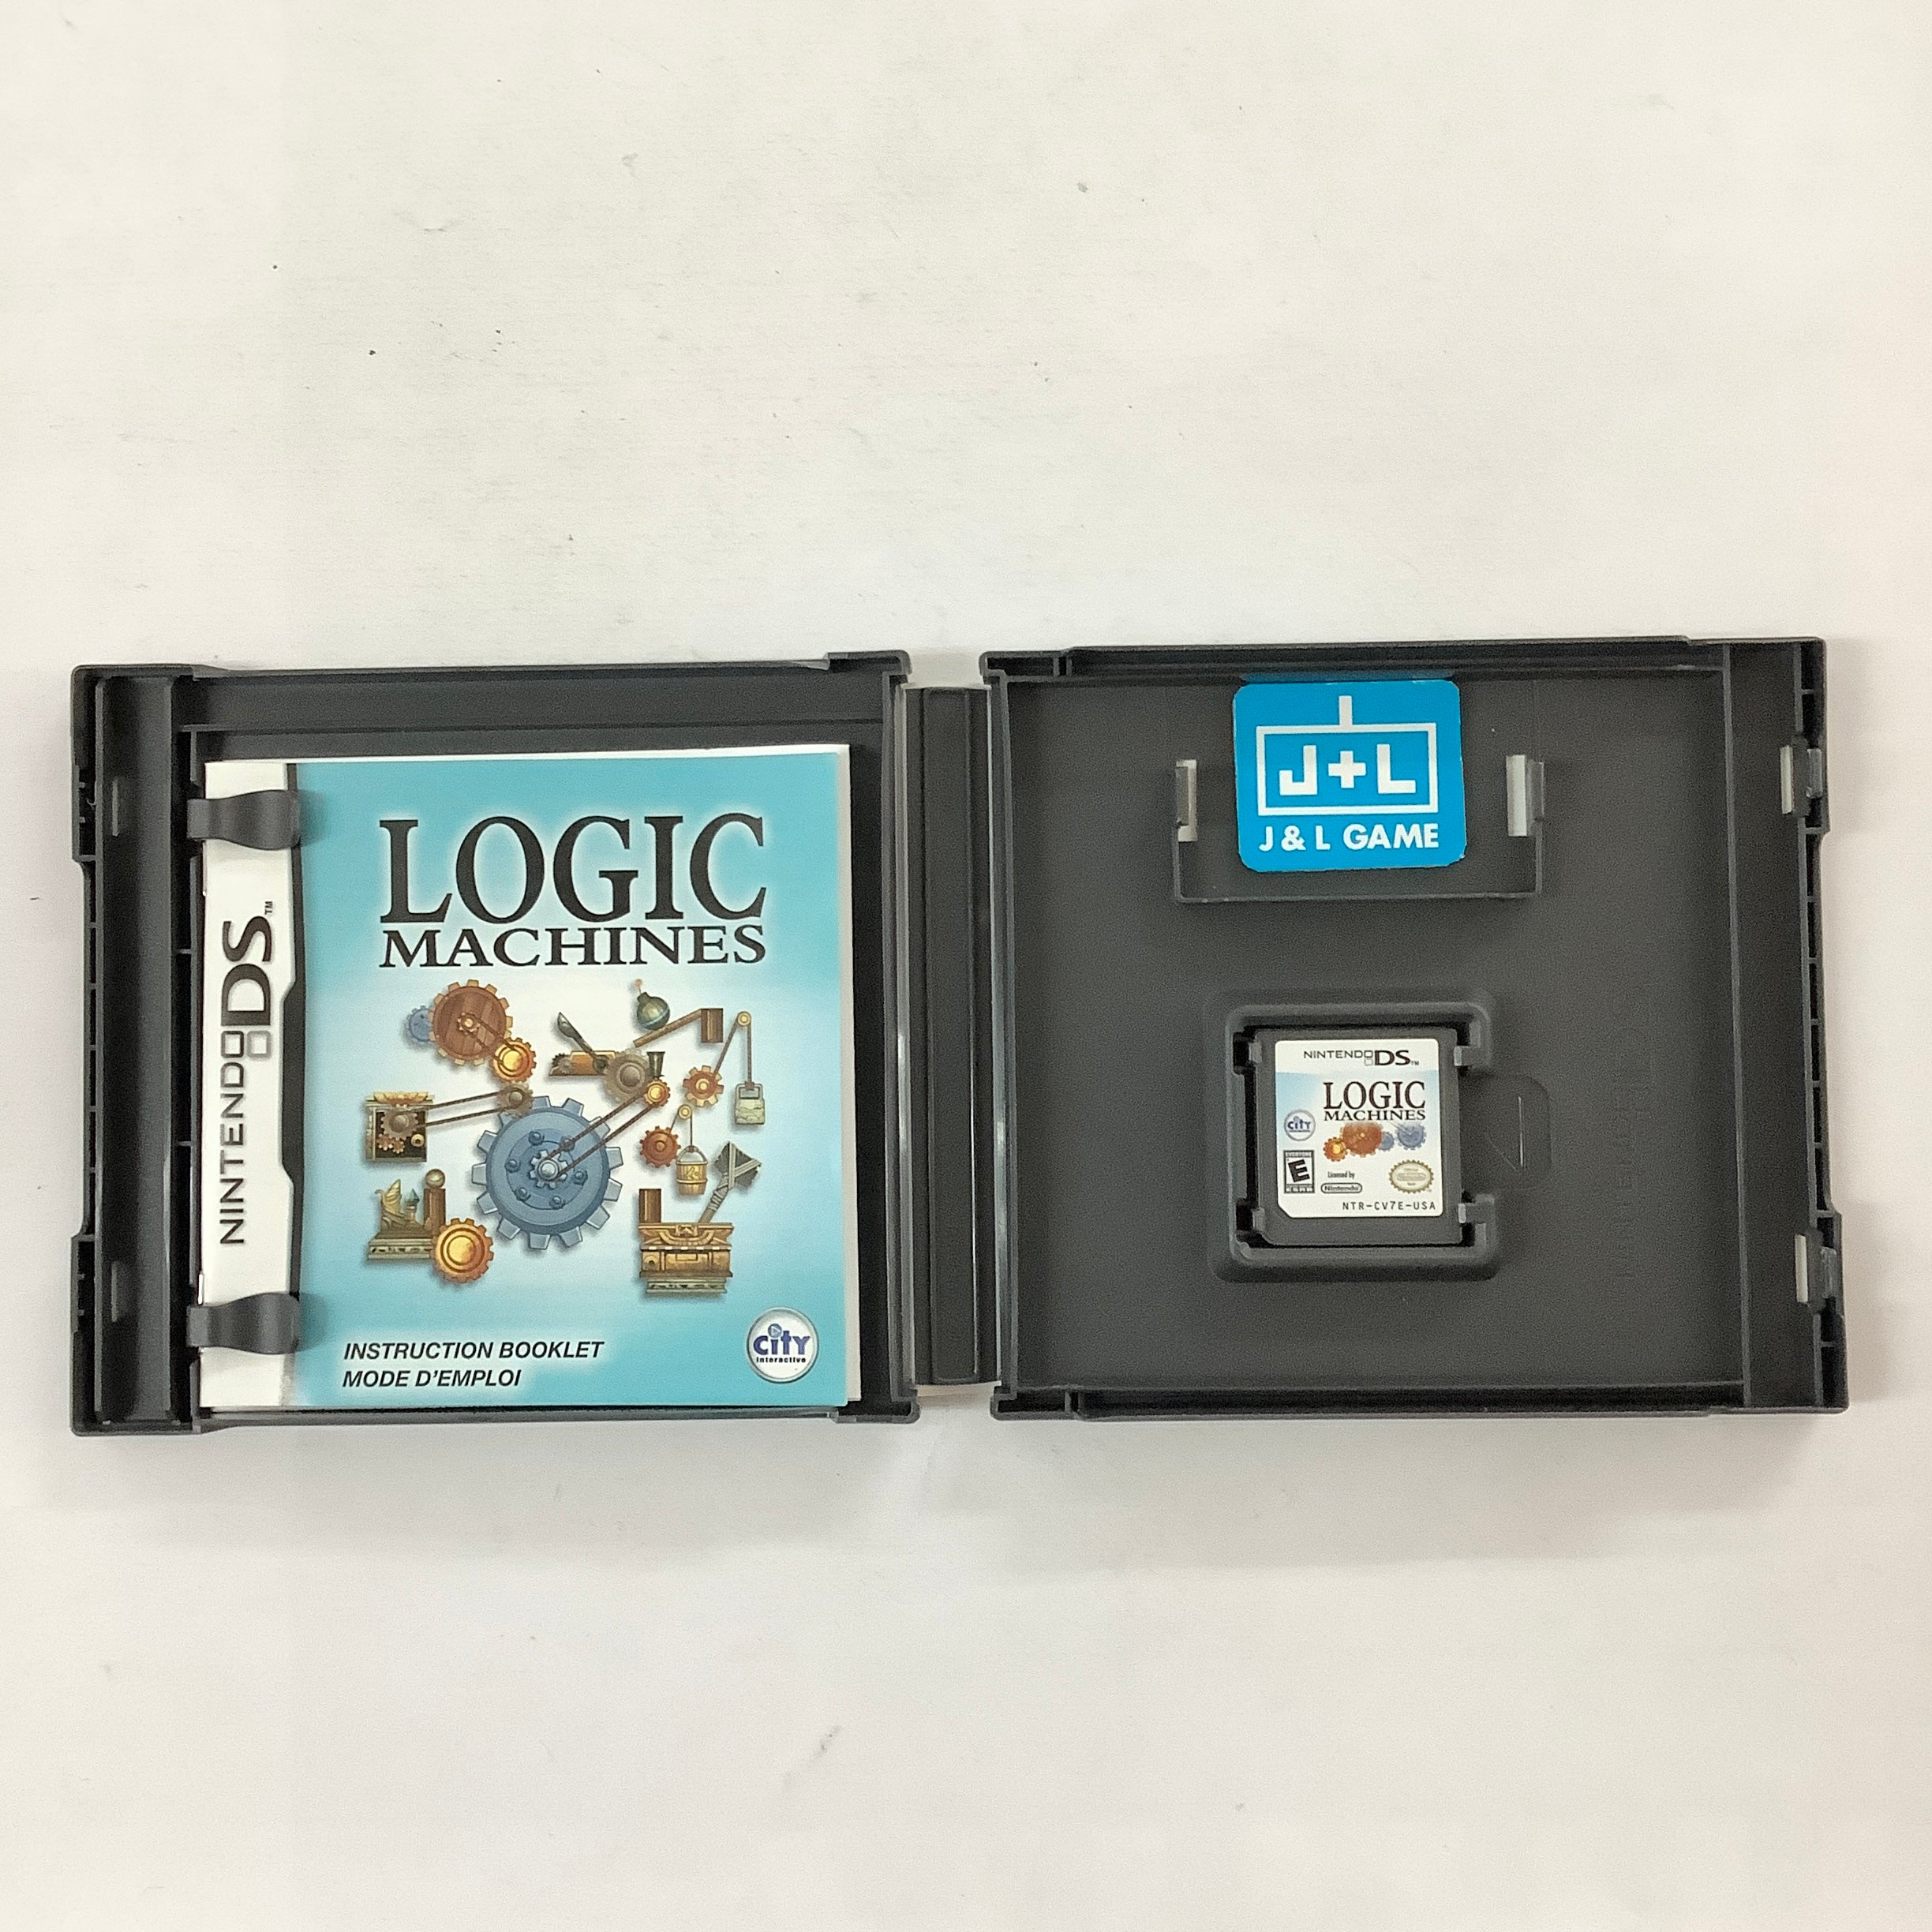 Logic Machines - (NDS) Nintendo DS [Pre-Owned]